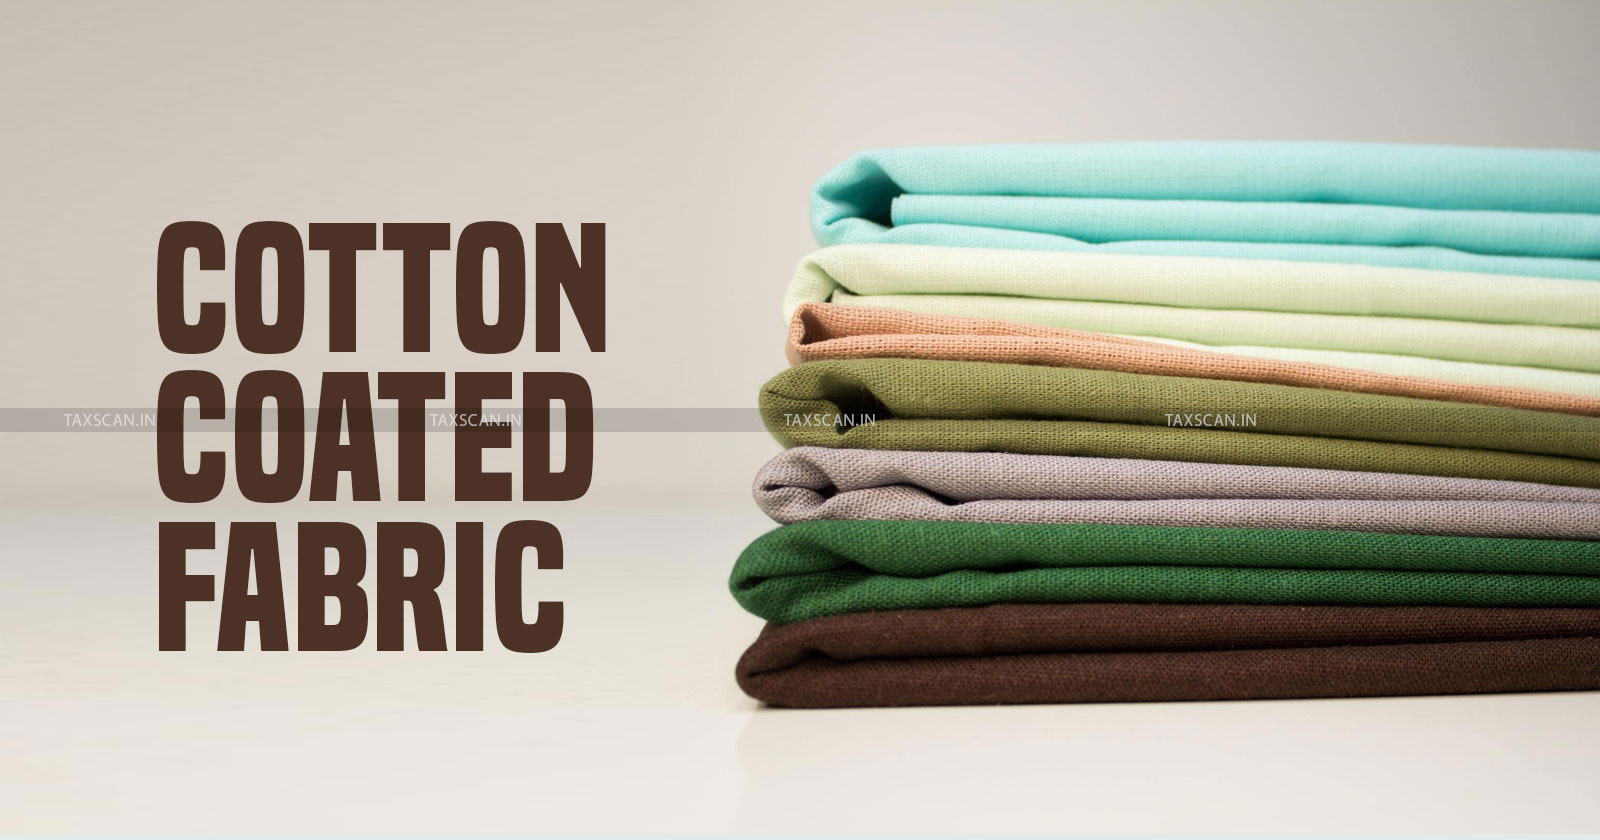 Emery Cloth - Cotton Coated Fabric - eligible for Sales Tax Exemption - Andhra Pradesh HC - taxscan